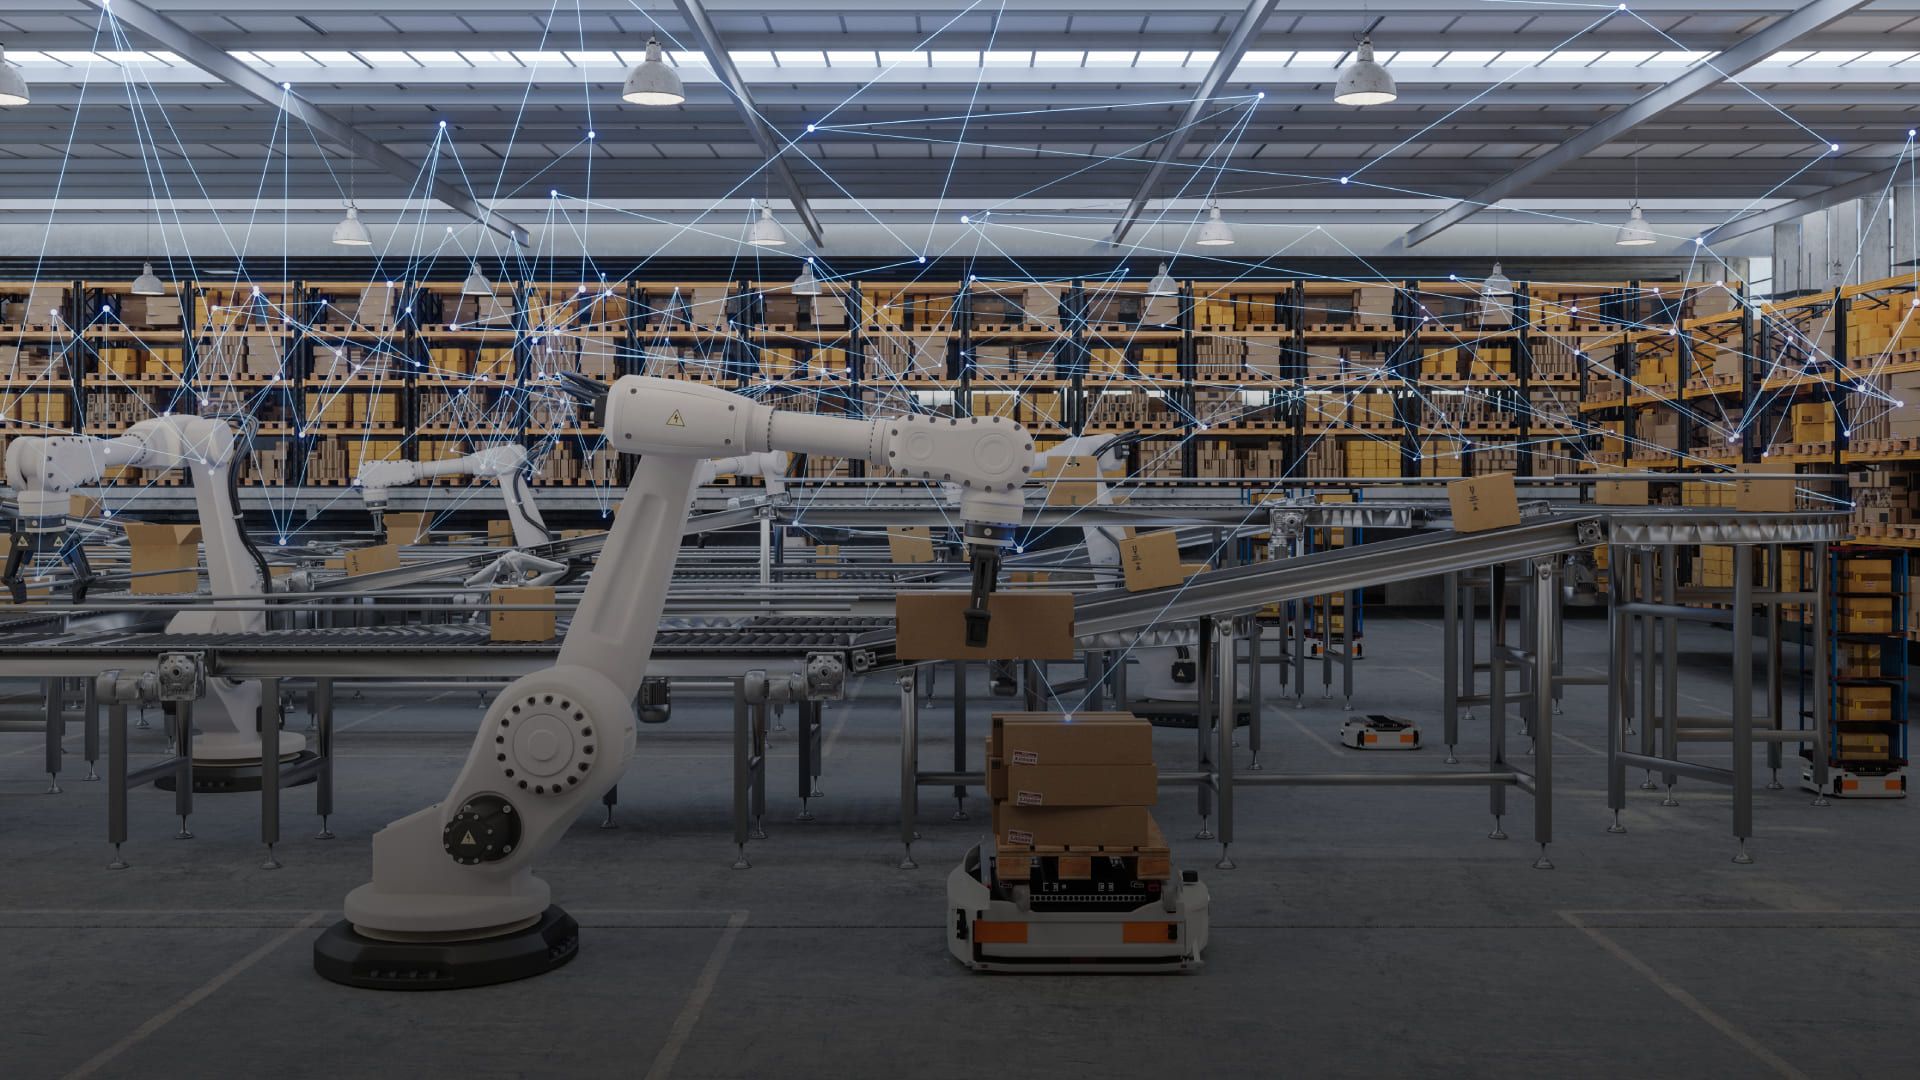 NEOM's Supply Chain management streamlined through Robotic Automation